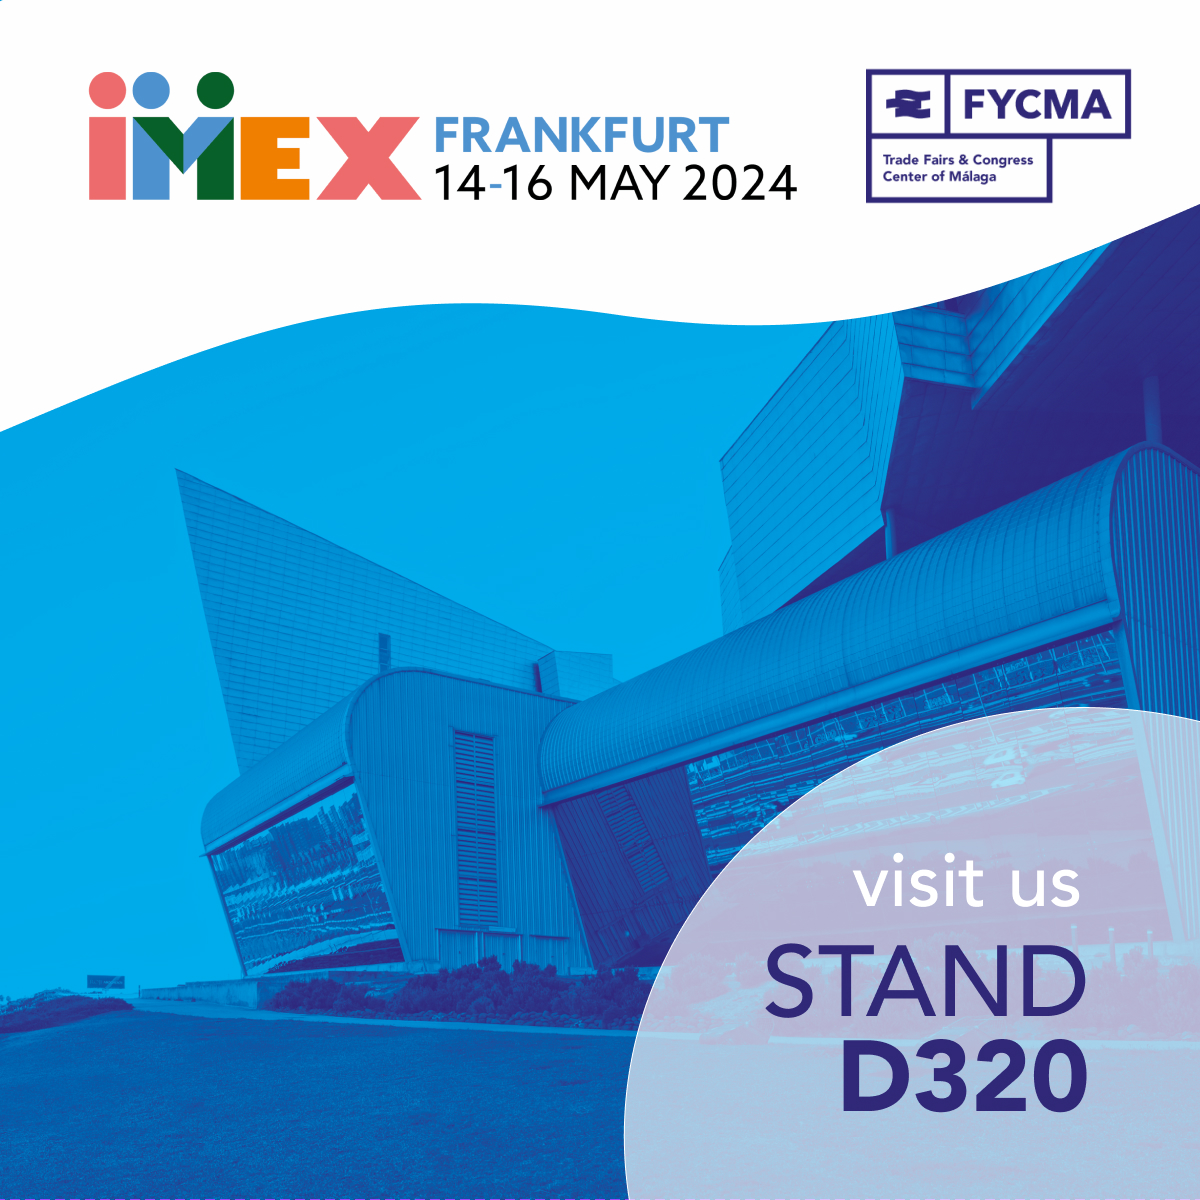 Excited to announce FYCMA's participation at @IMEX_Group Frankfurt, Europe's top MICE event! Join us at stand D320 for insights and collaboration in event management. Discover our success stories and commitment to excellence. 🌟 #IMEX24 #FYCMA #MICE #eventprofs #innovation